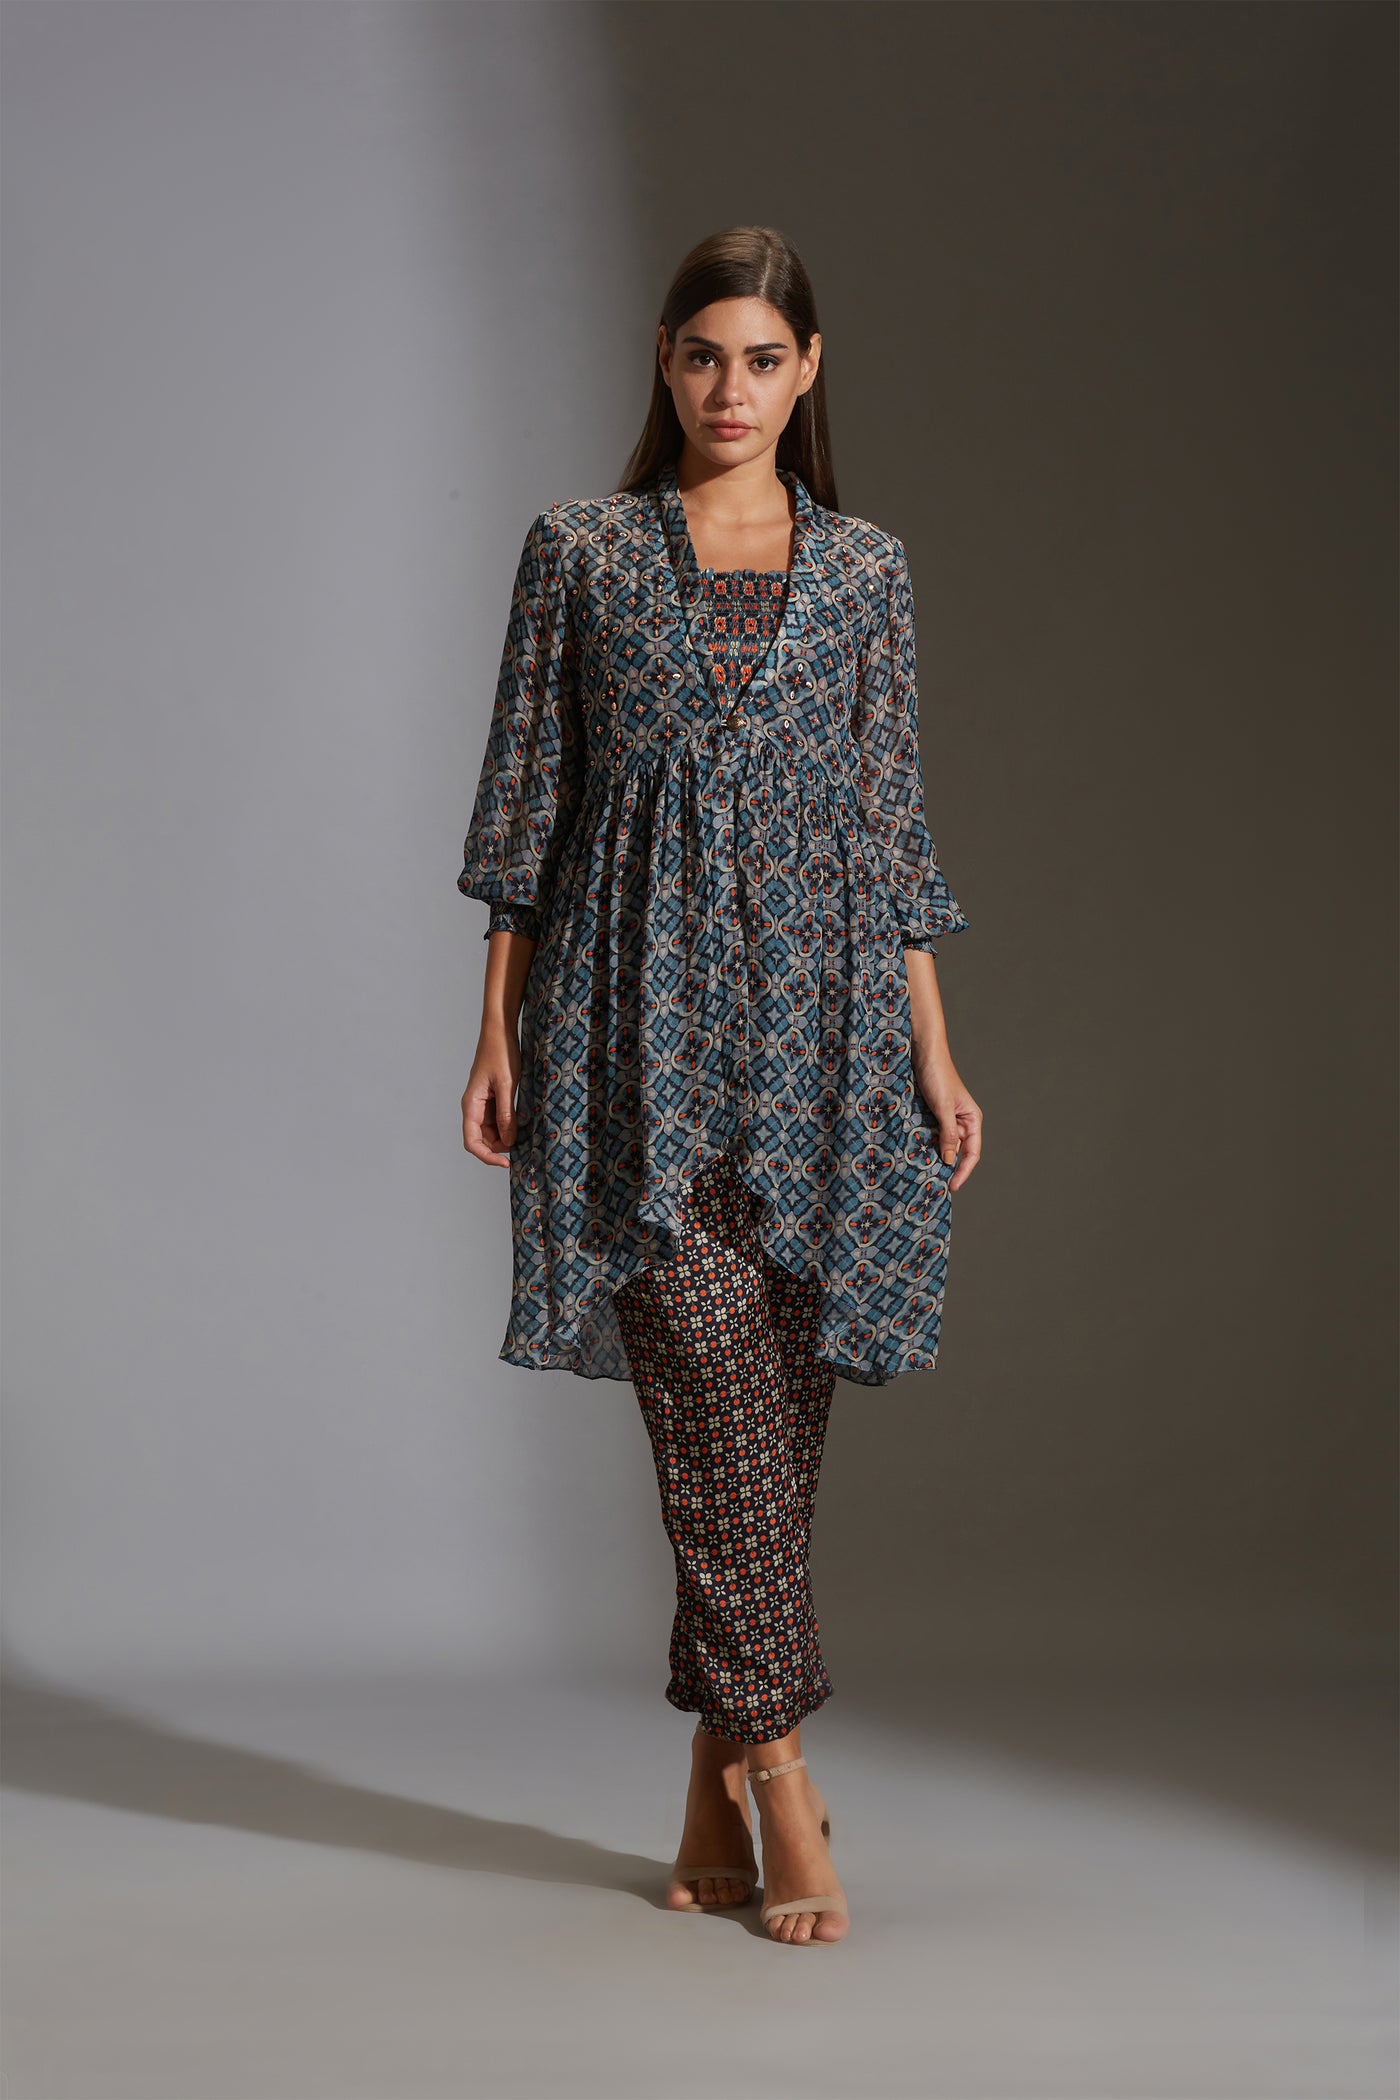 sougat paul Printed rushed top paired with narrow bottom pants and printed chiffon jacket blue fusion indian designer wear online shopping melange singapore